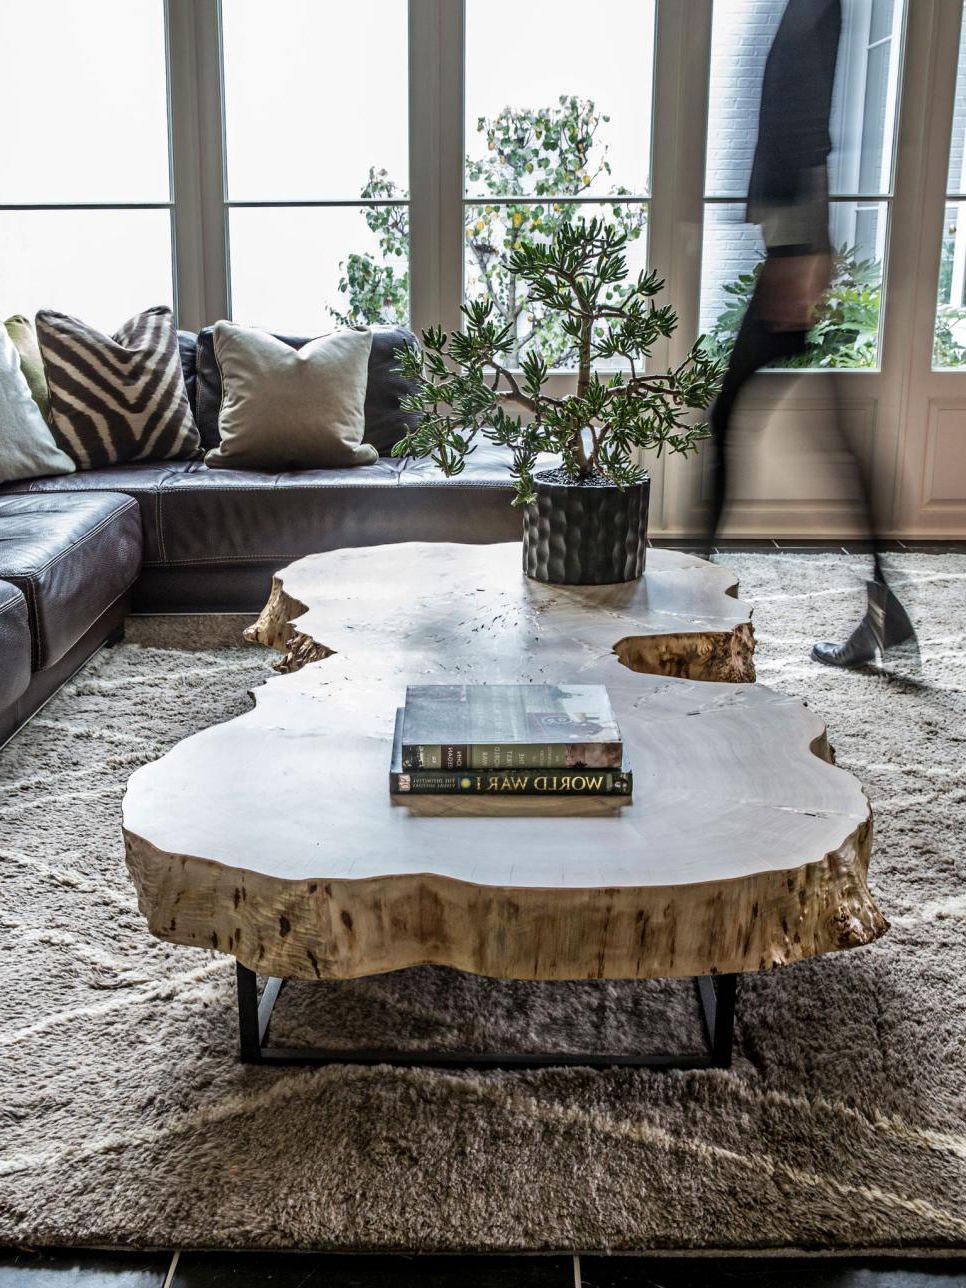 Widely Used Rustic Espresso Wood Coffee Tables With Regard To Rustic Tree Trunk Coffee Table (View 12 of 20)